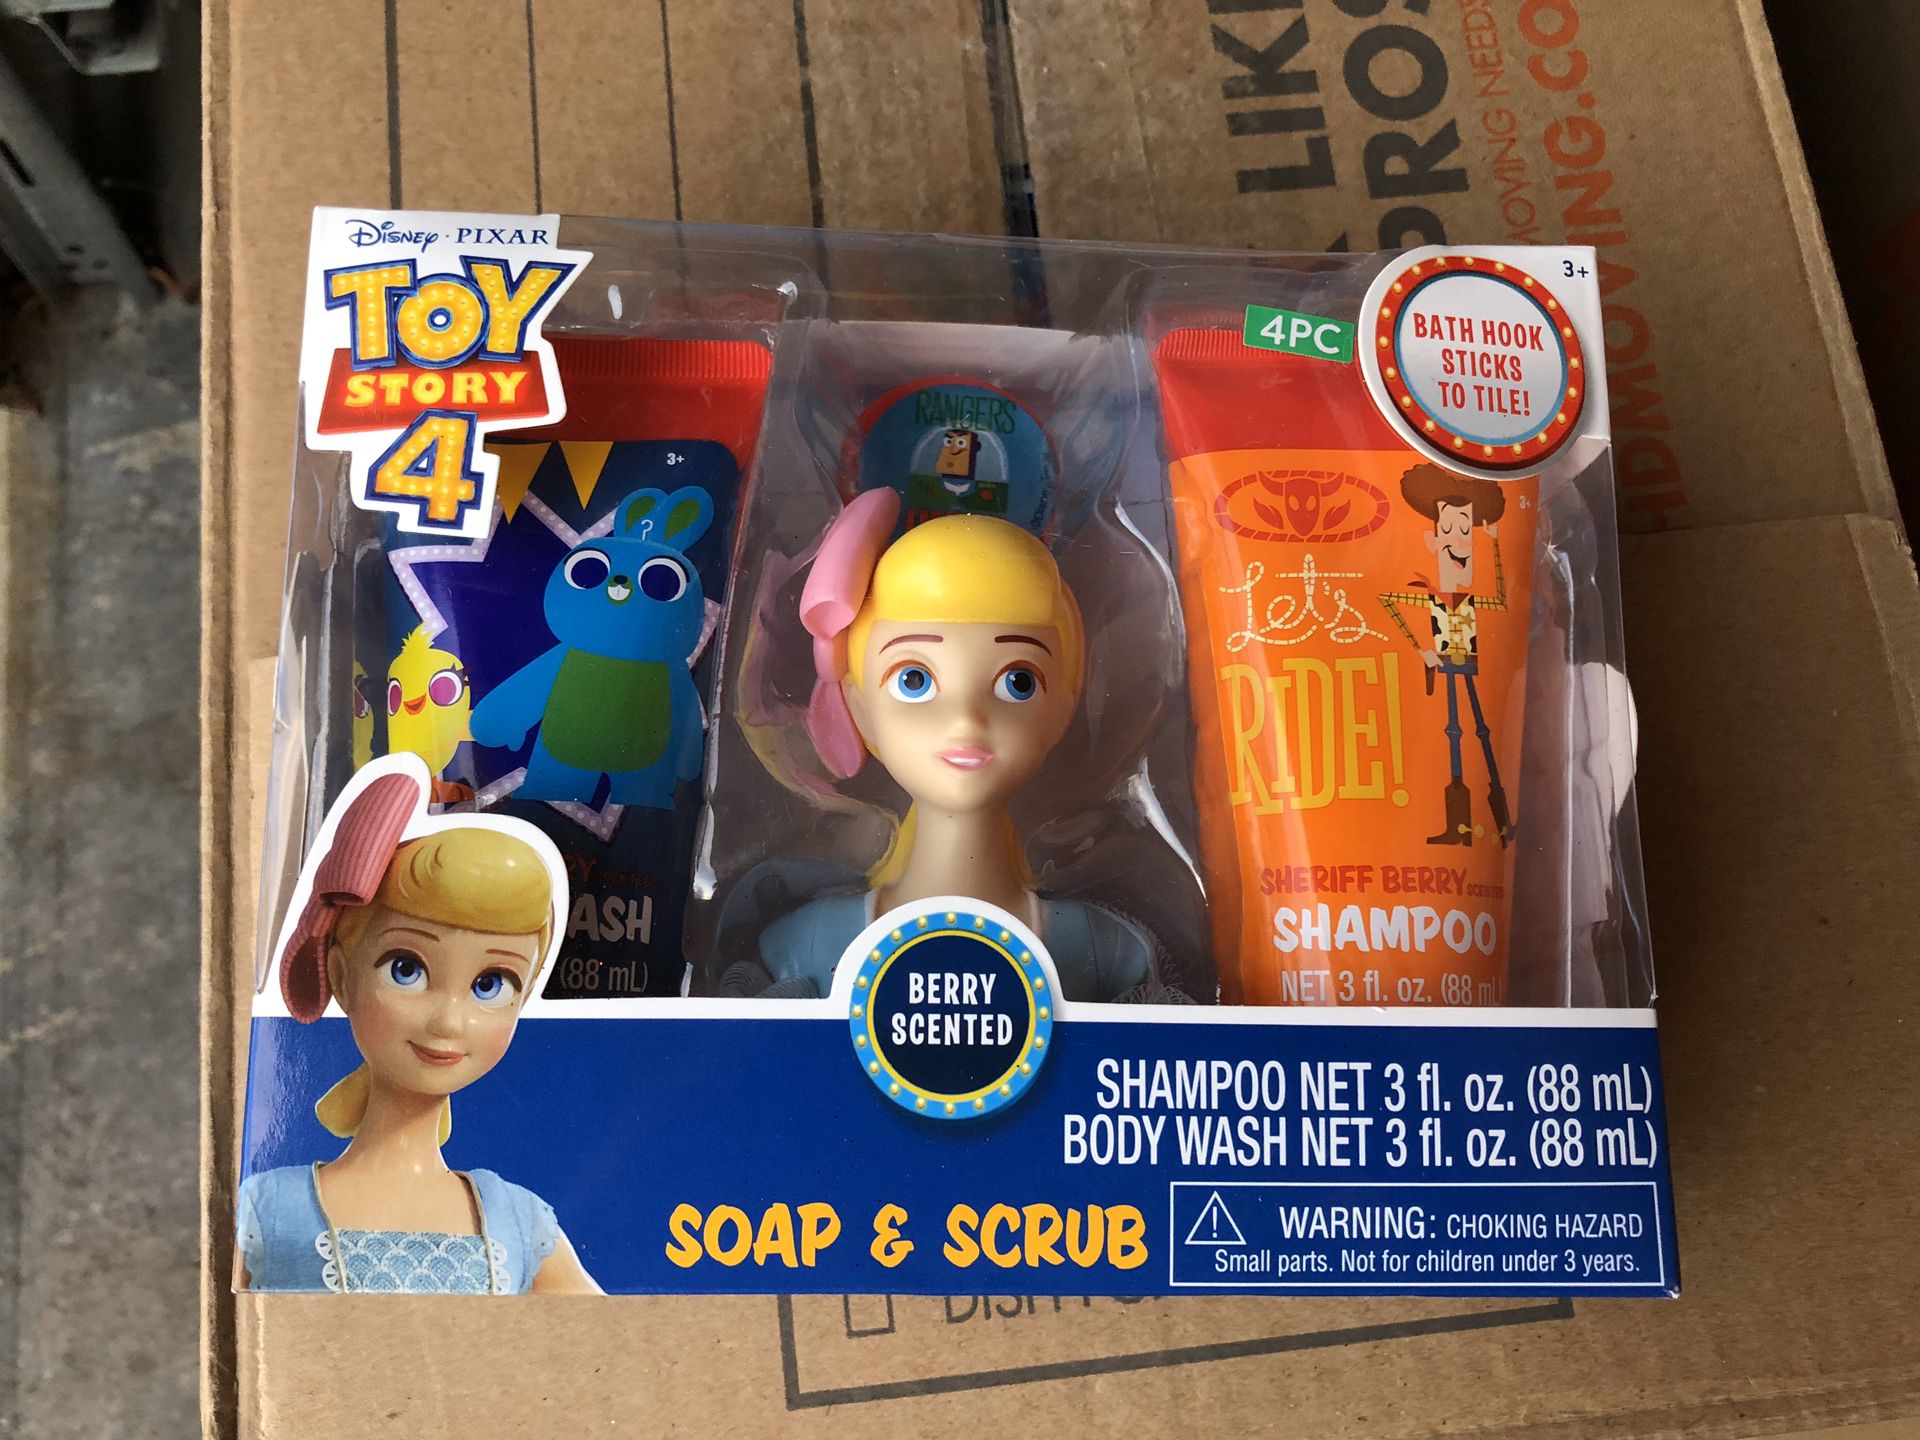 Toy story 4 soap and scrub